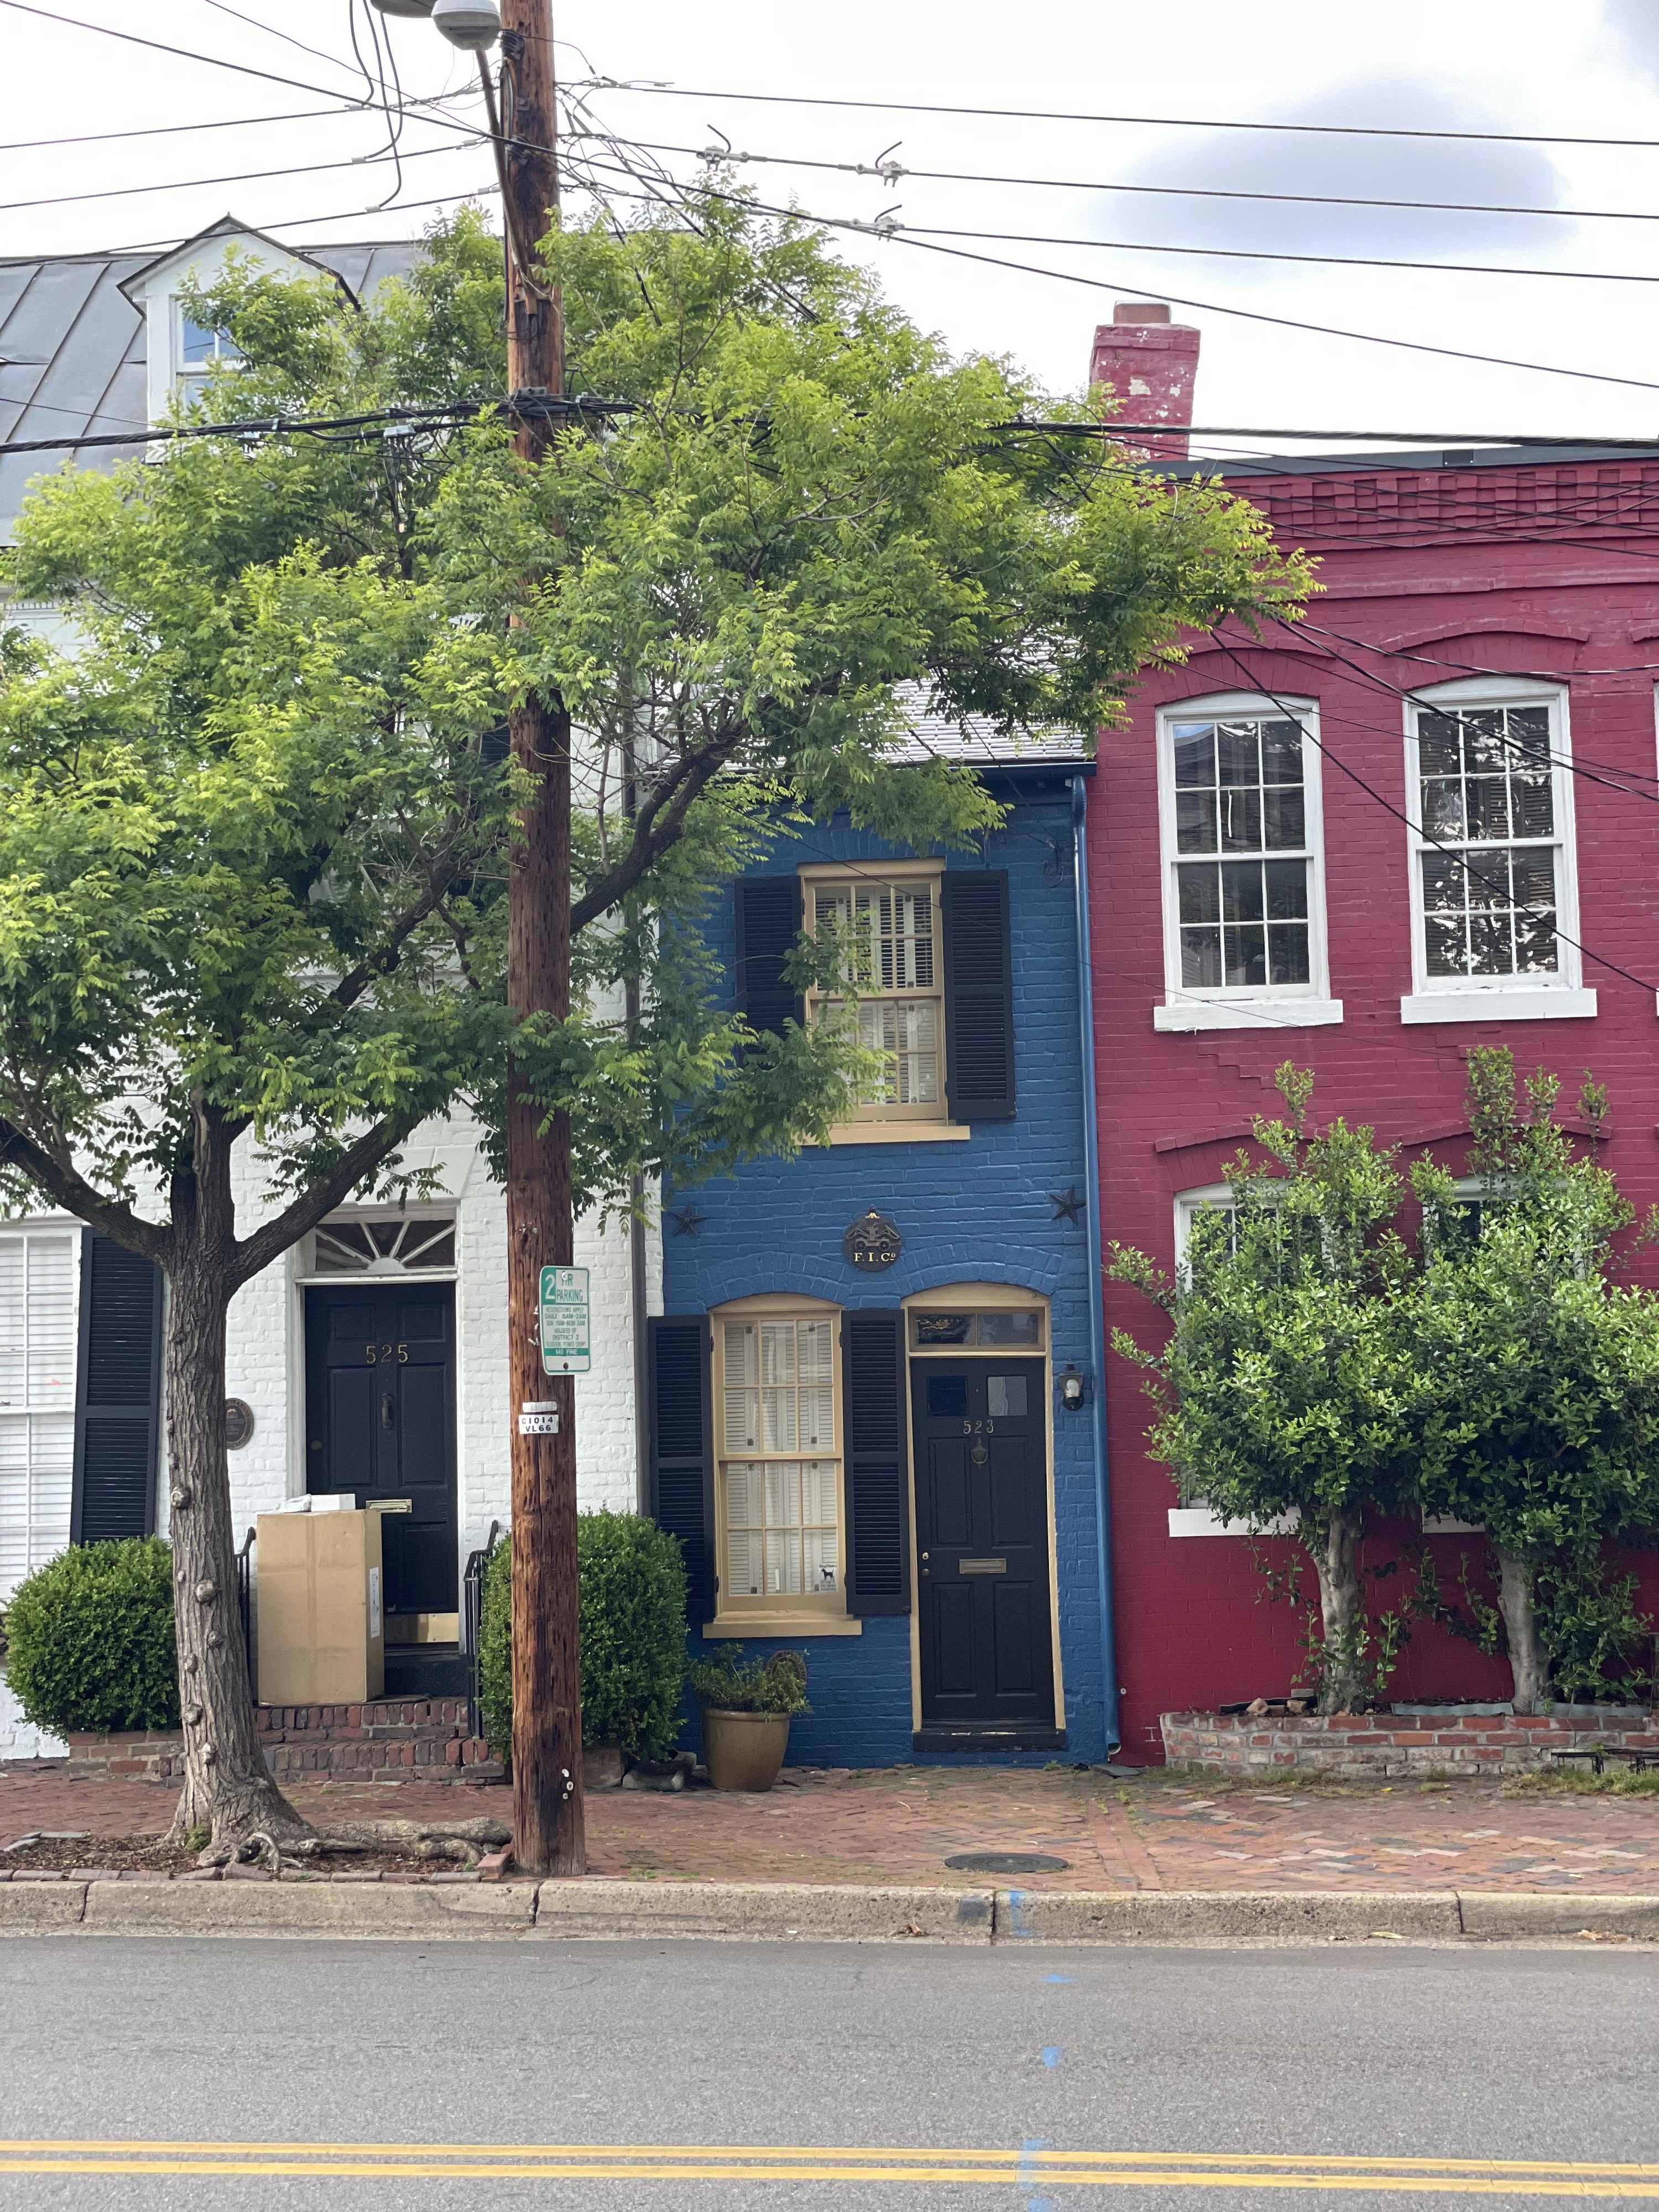 A very narrow, two-story blue house with one window on the second floor and abutting two buildings